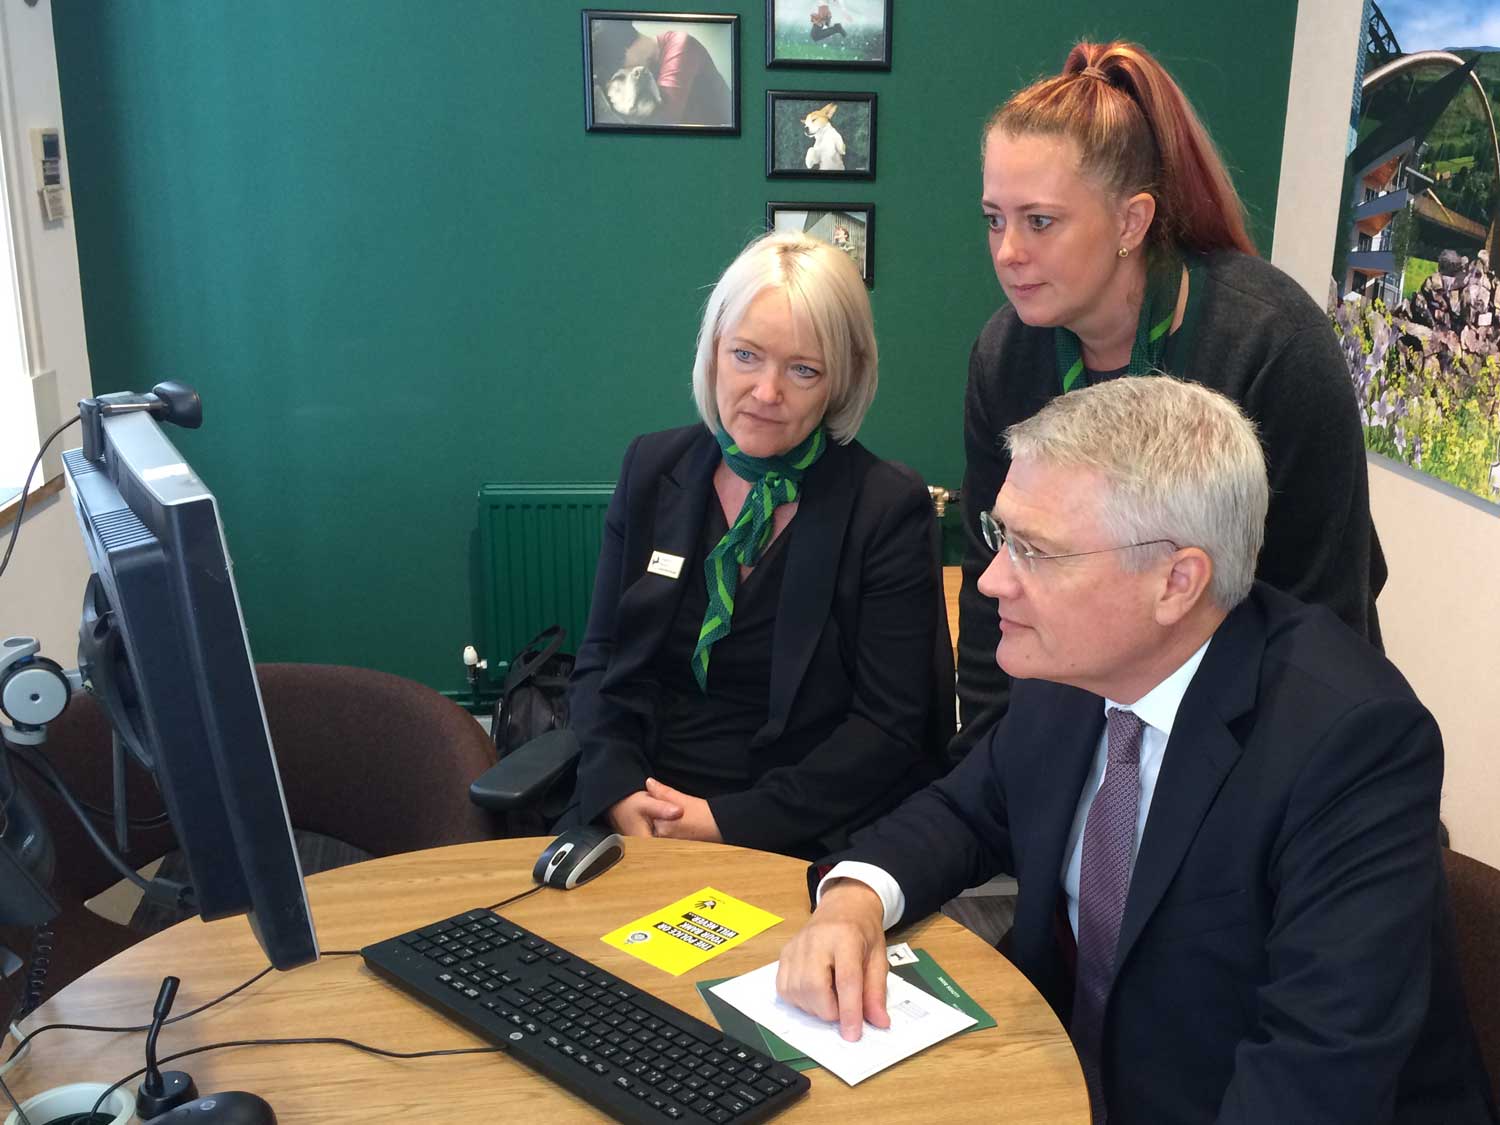 (L – R) Jo Medd and Emma Brierley demonstrate some of the latest security techniques to Andrew Jones MP